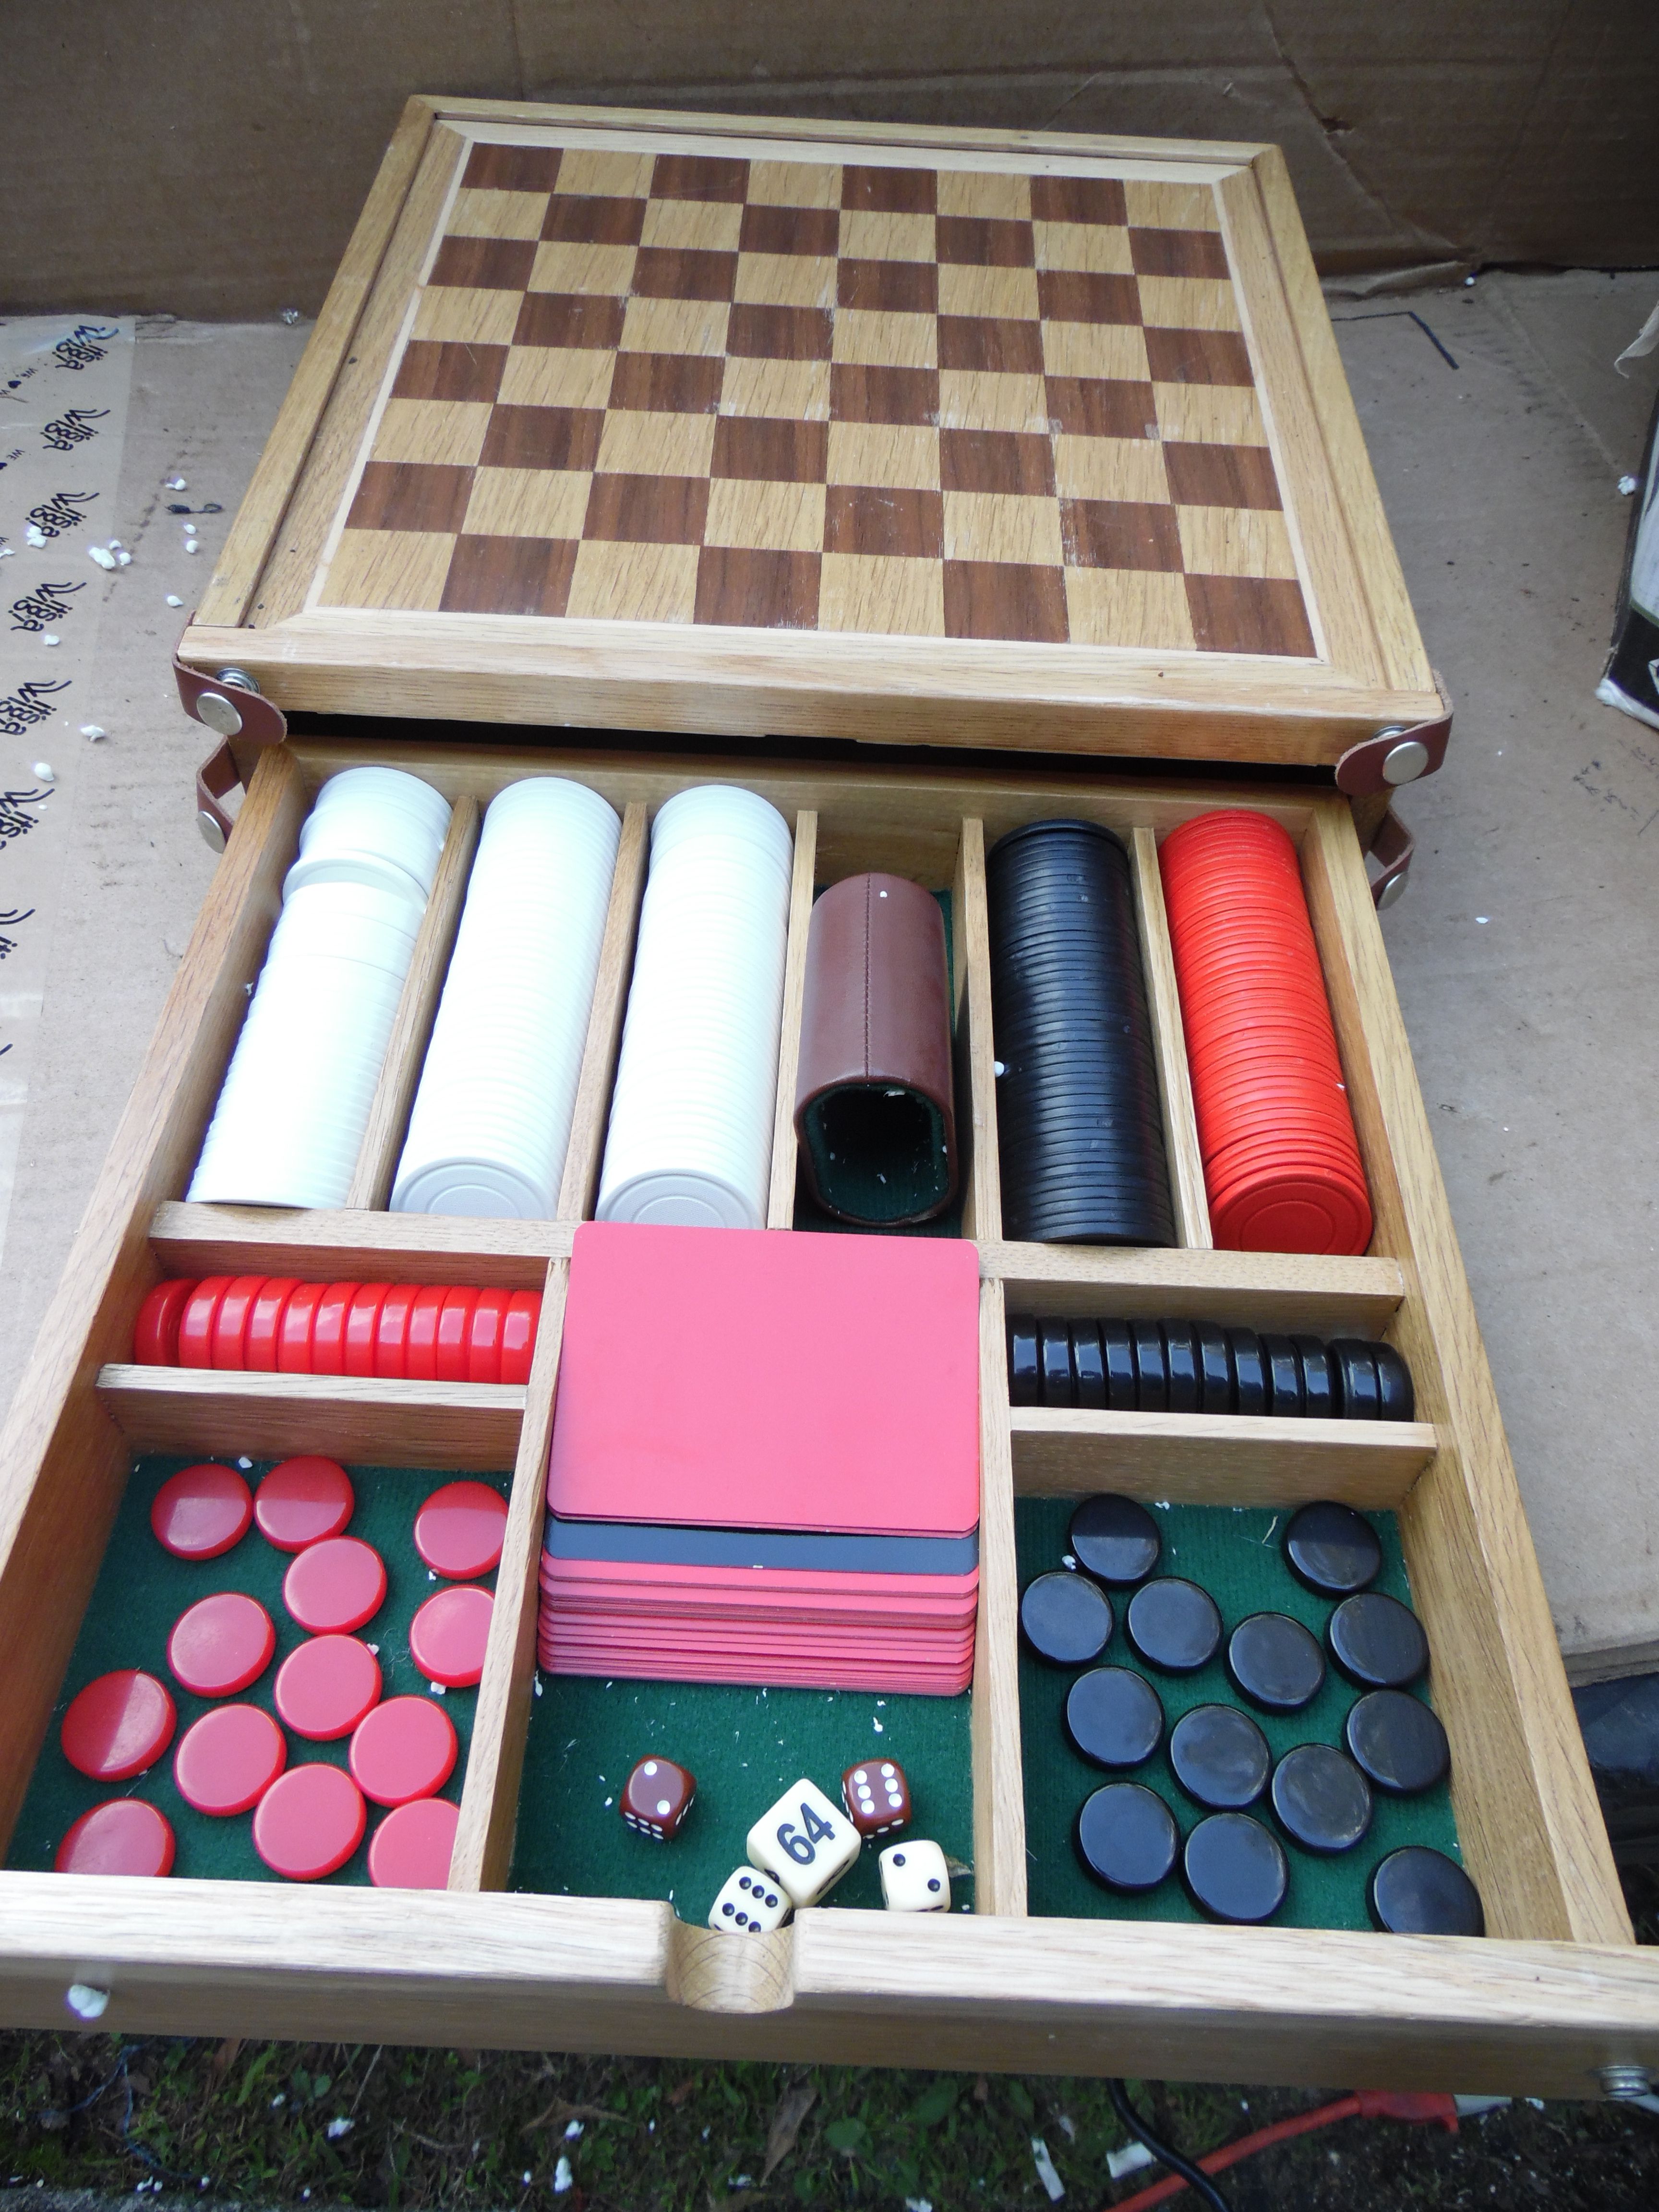 Solid Wood Backgammon Chess Poker Game Board With Chips Dice & Playing Cards